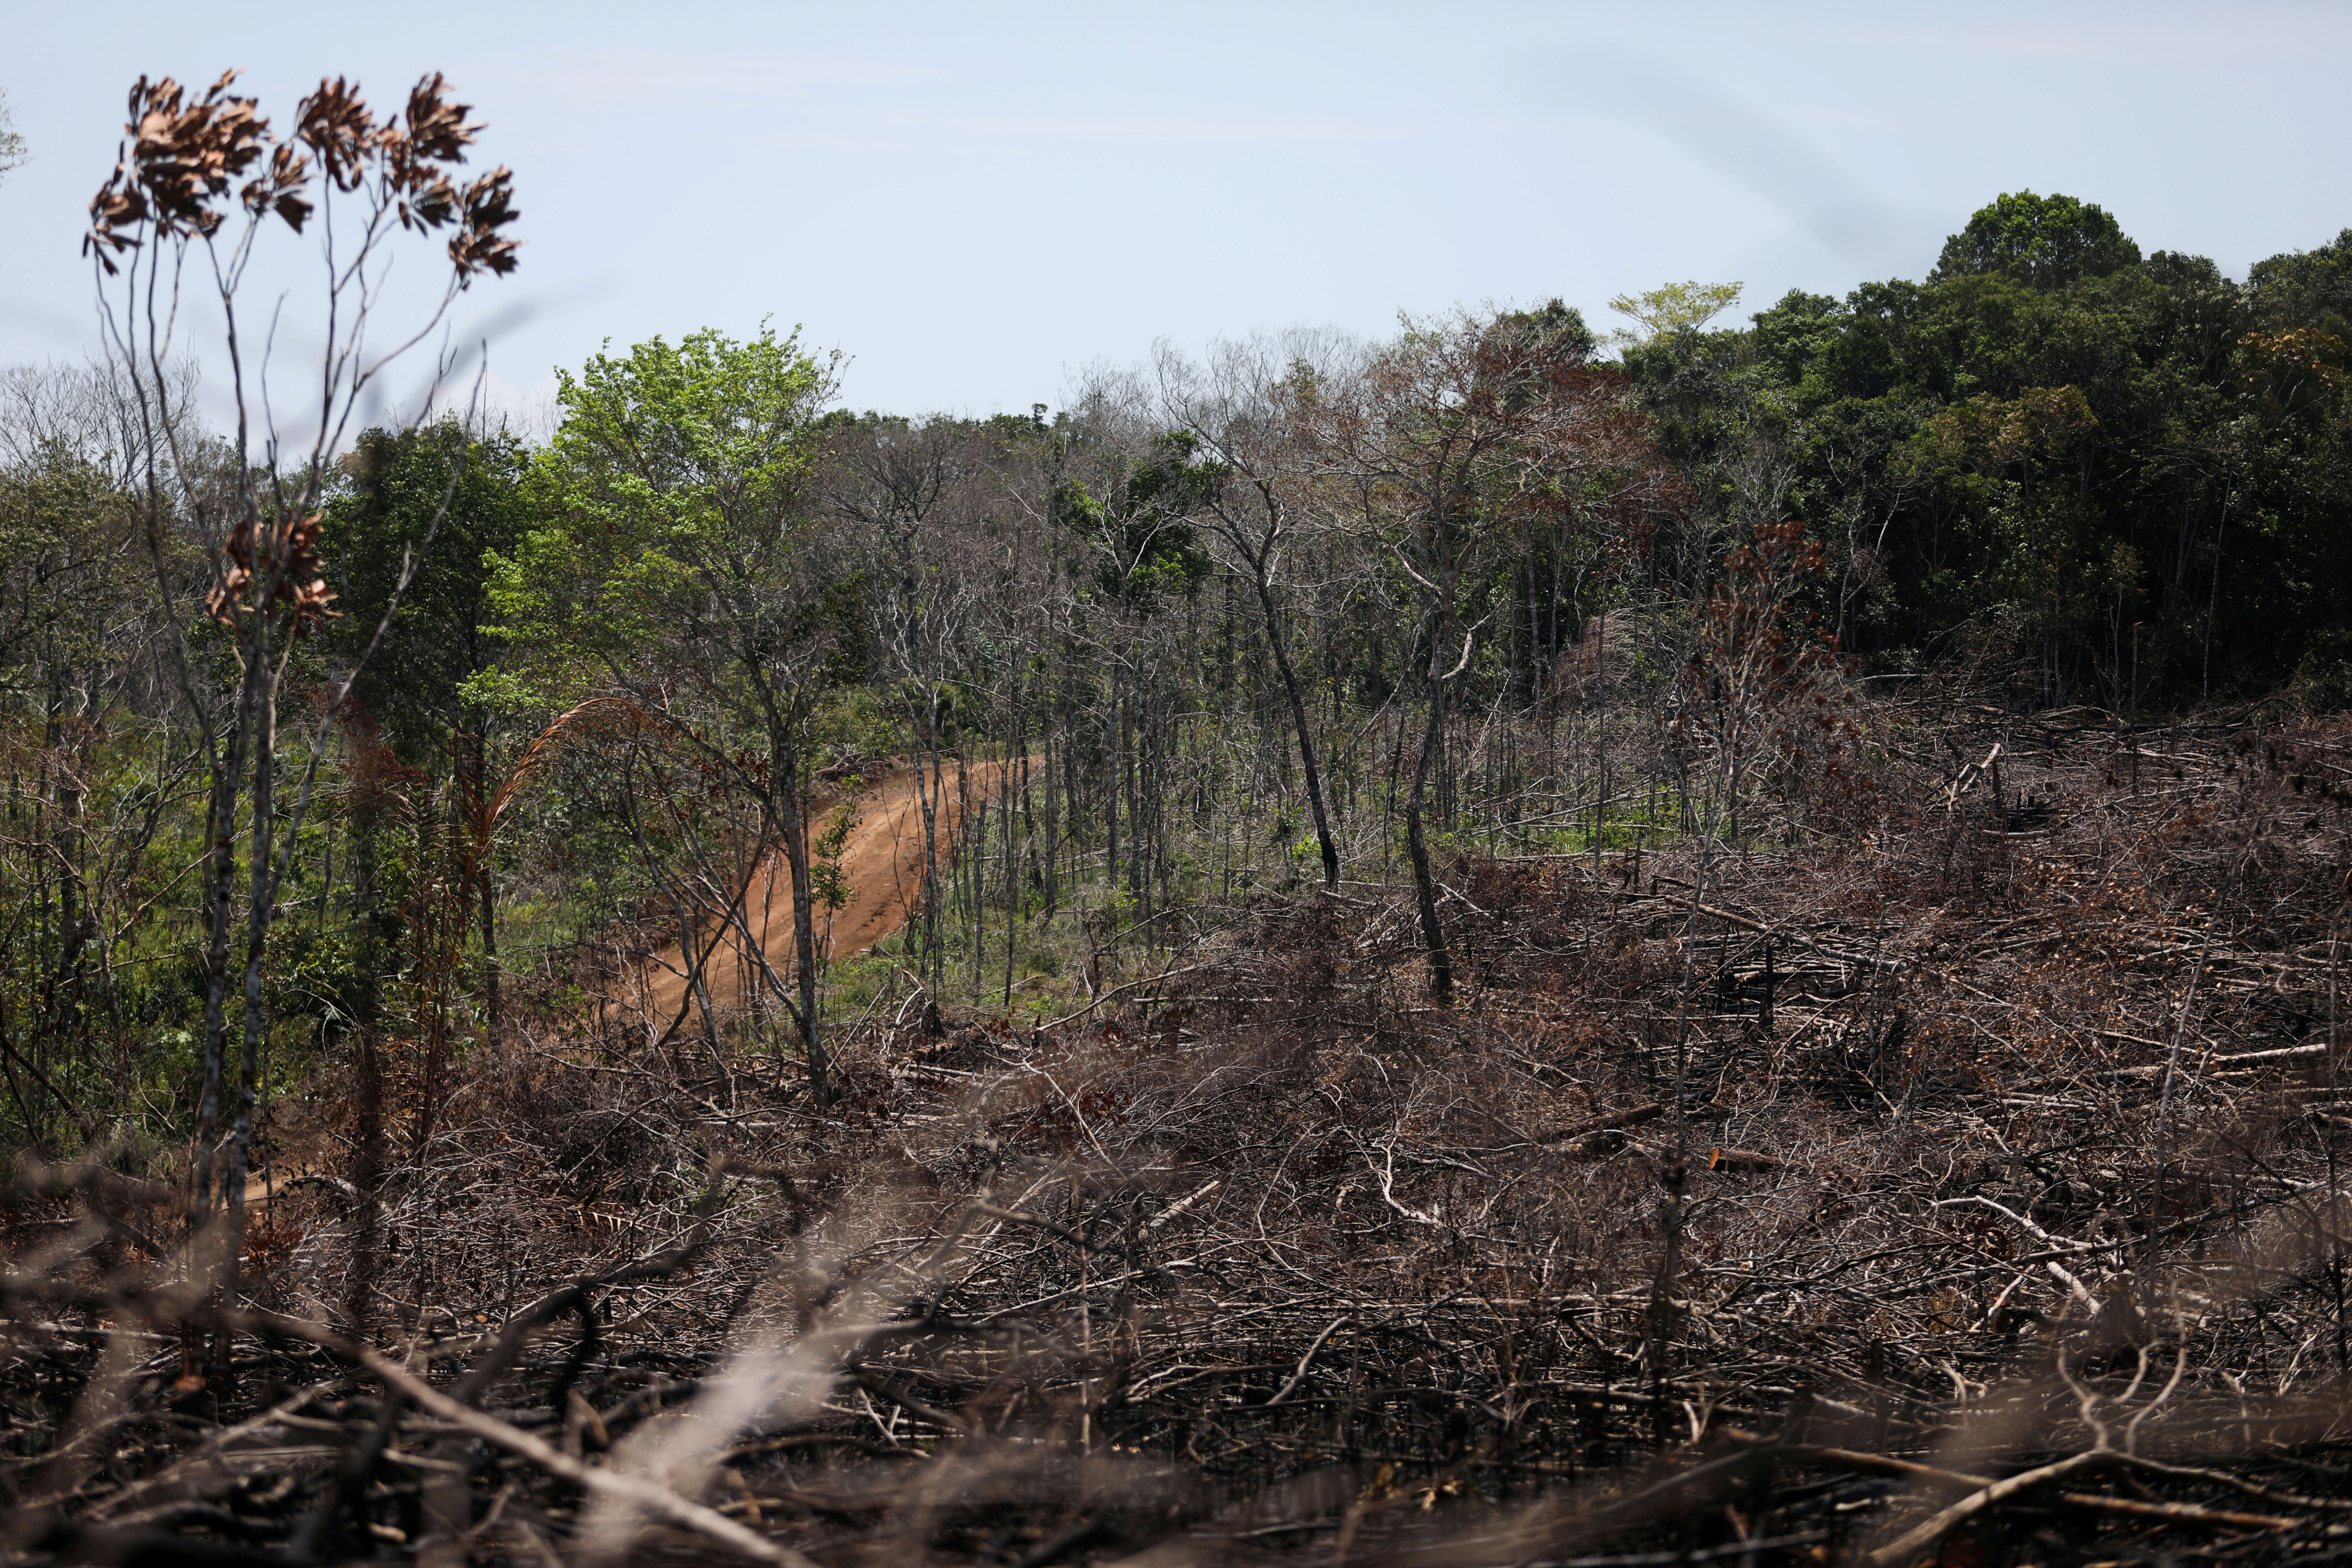 View of a deforested area in the middle of the Yari plains, in Caqueta